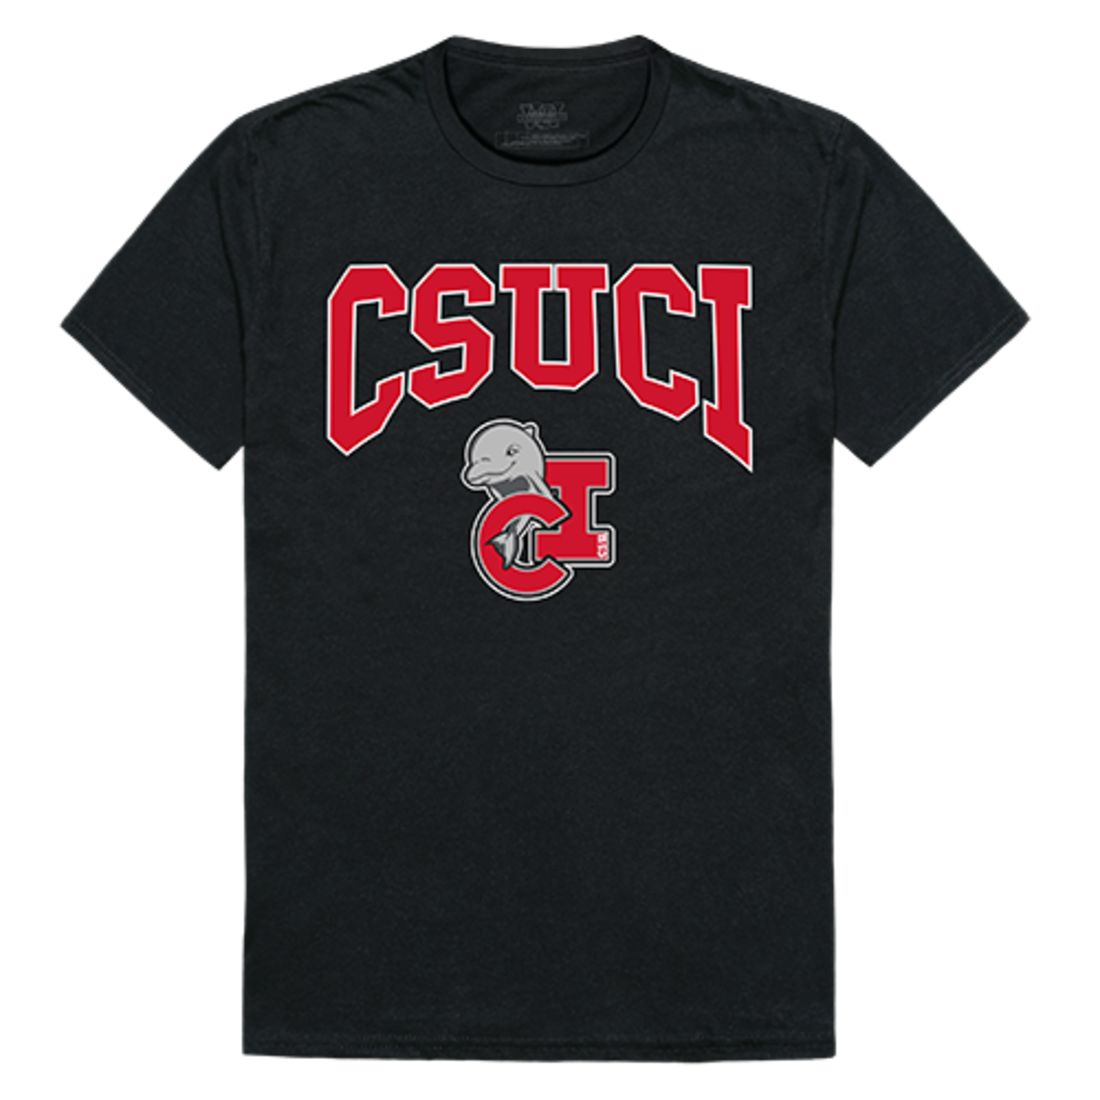 CSUCI CalIfornia State University Channel Islands The Dolphins Athletic T-Shirt Black-Campus-Wardrobe